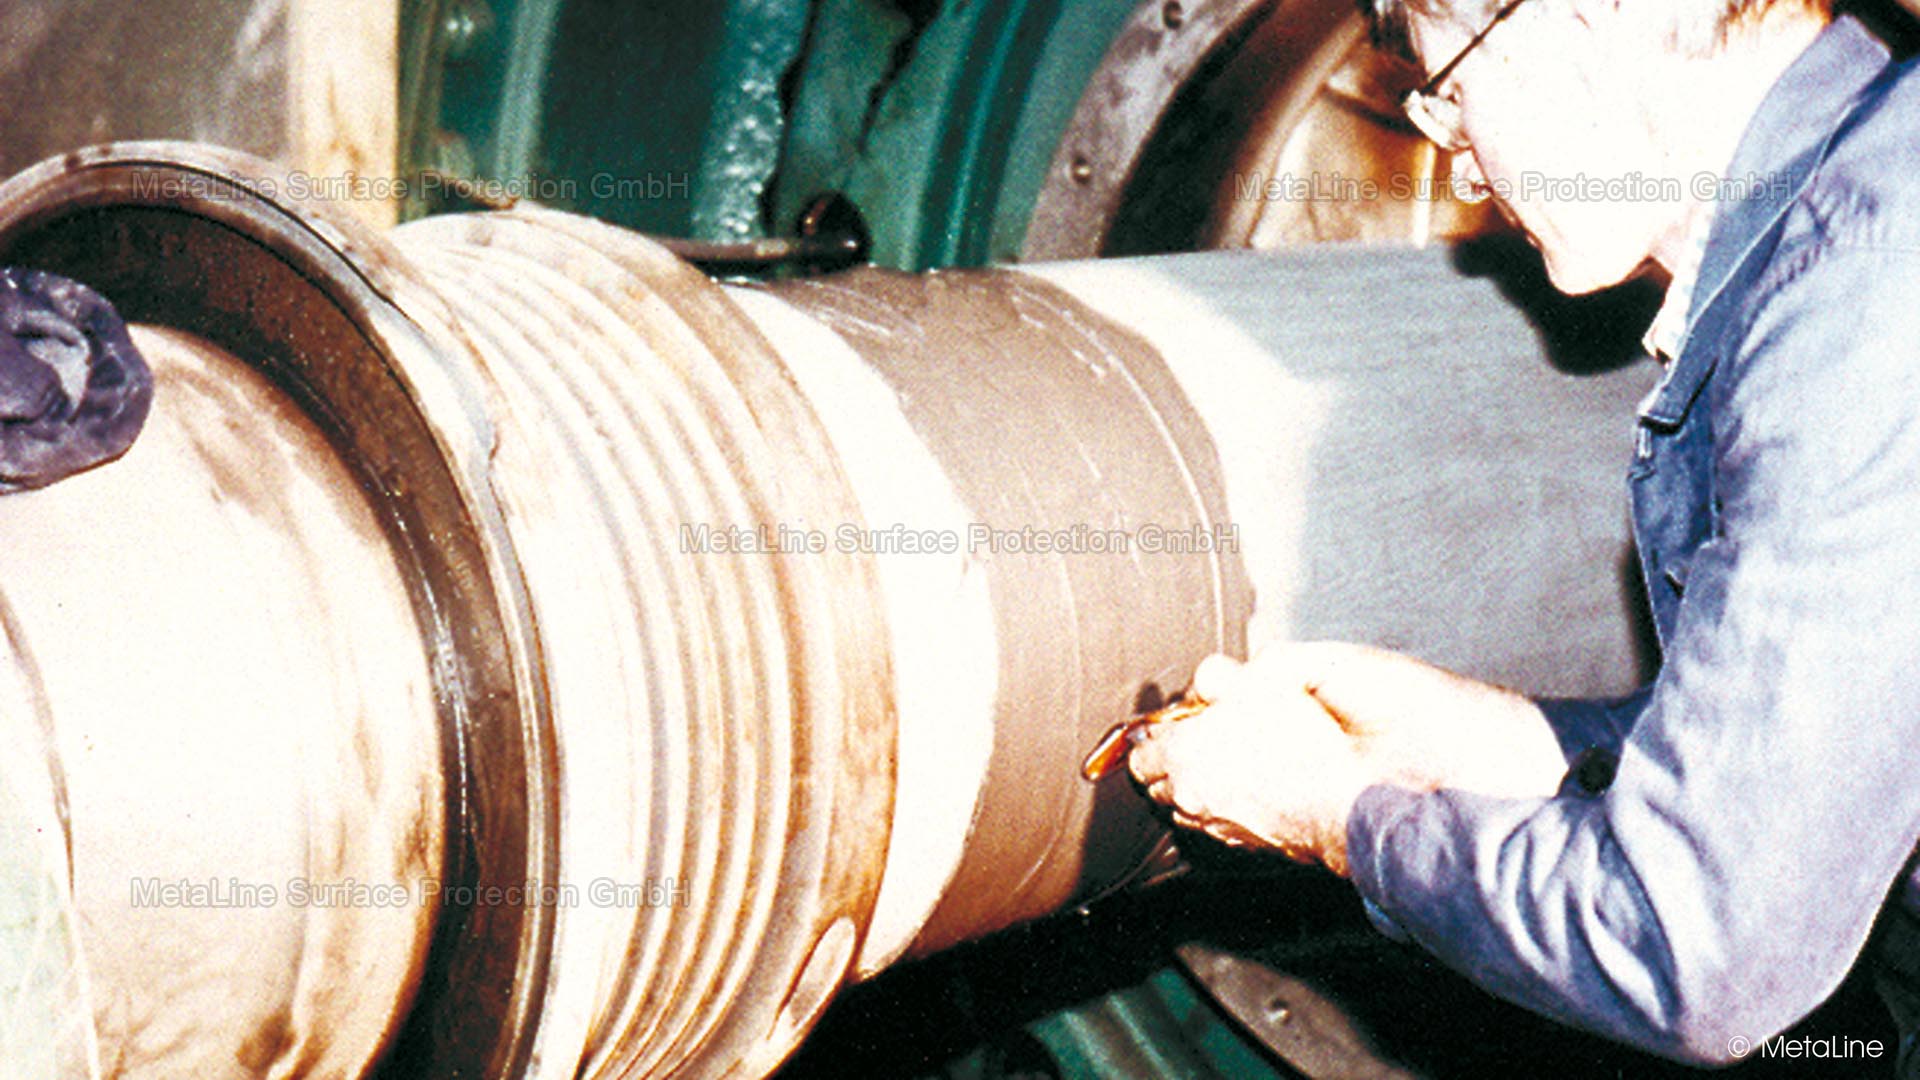 <!-- START: ConditionalContent --> Turbine shaft, drive shaft, bearing point, fill, remove, recondition <!-- END: ConditionalContent -->   <!-- START: ConditionalContent --><!-- END: ConditionalContent -->   <!-- START: ConditionalContent --><!-- END: ConditionalContent -->